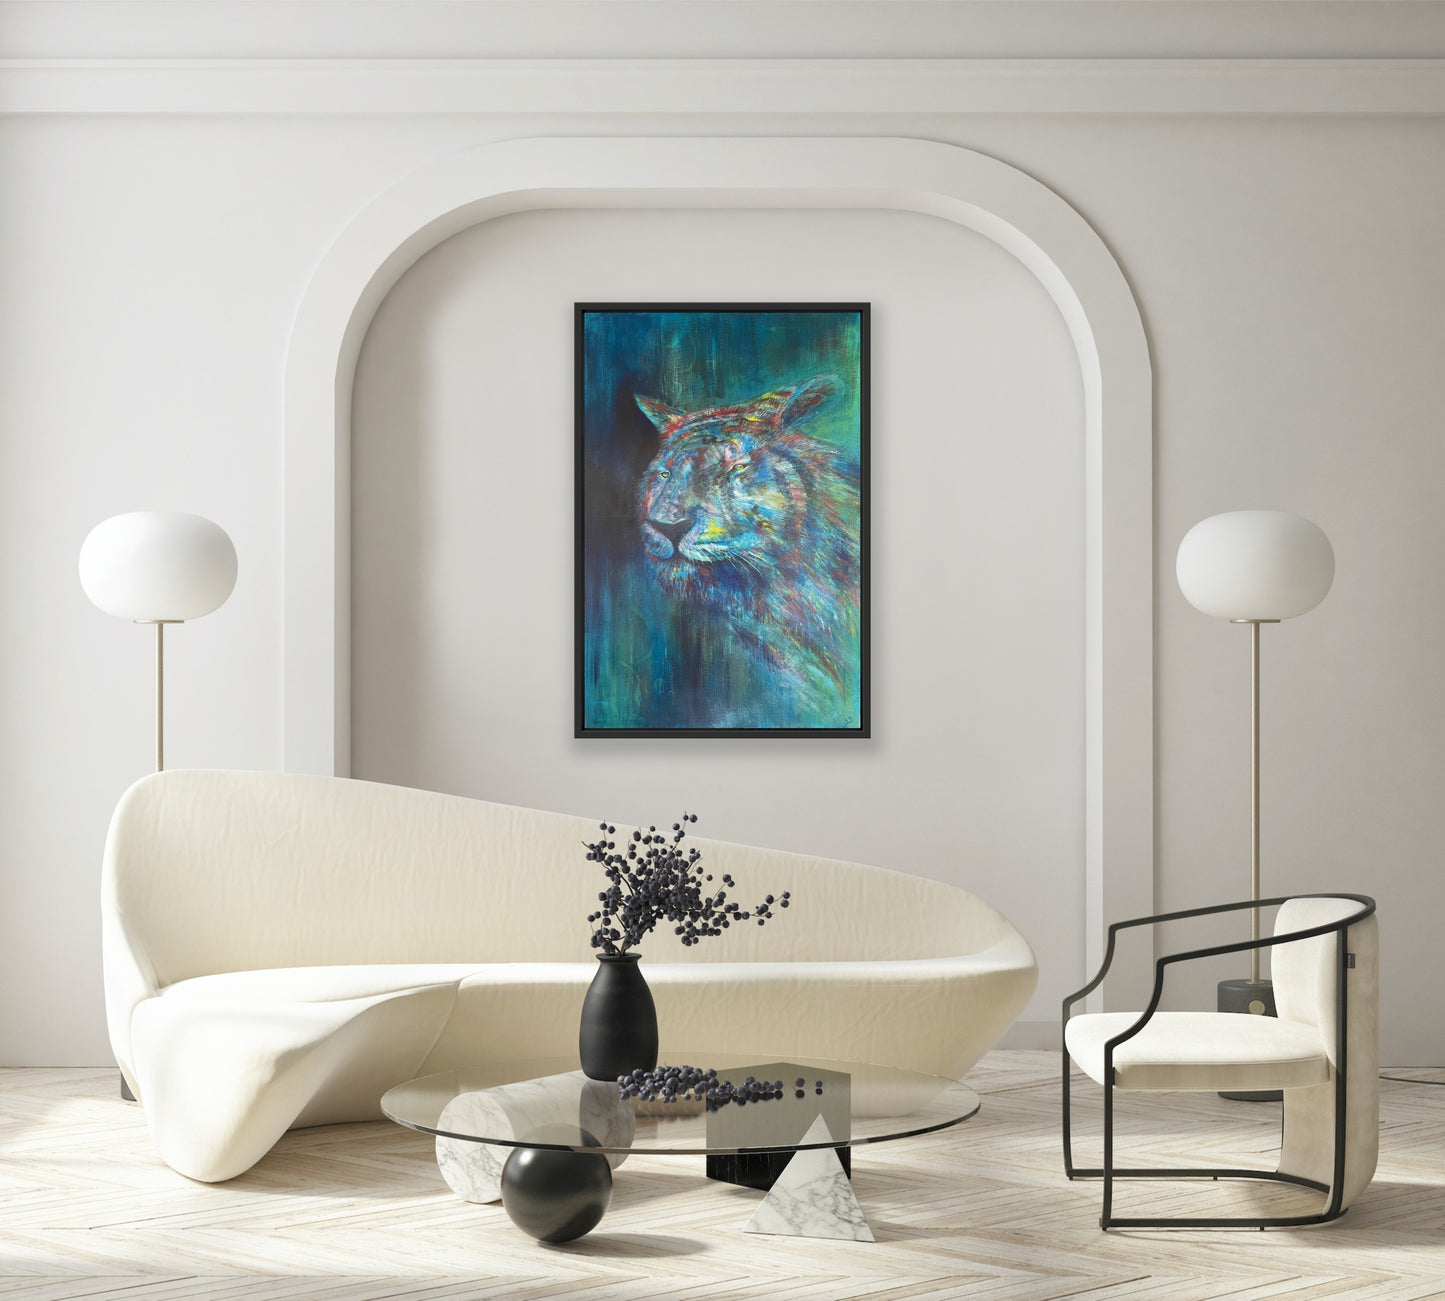 STRIPES OF MAJESTY (Into the Wild Series) 2023 - 91x61cm - Original Painting